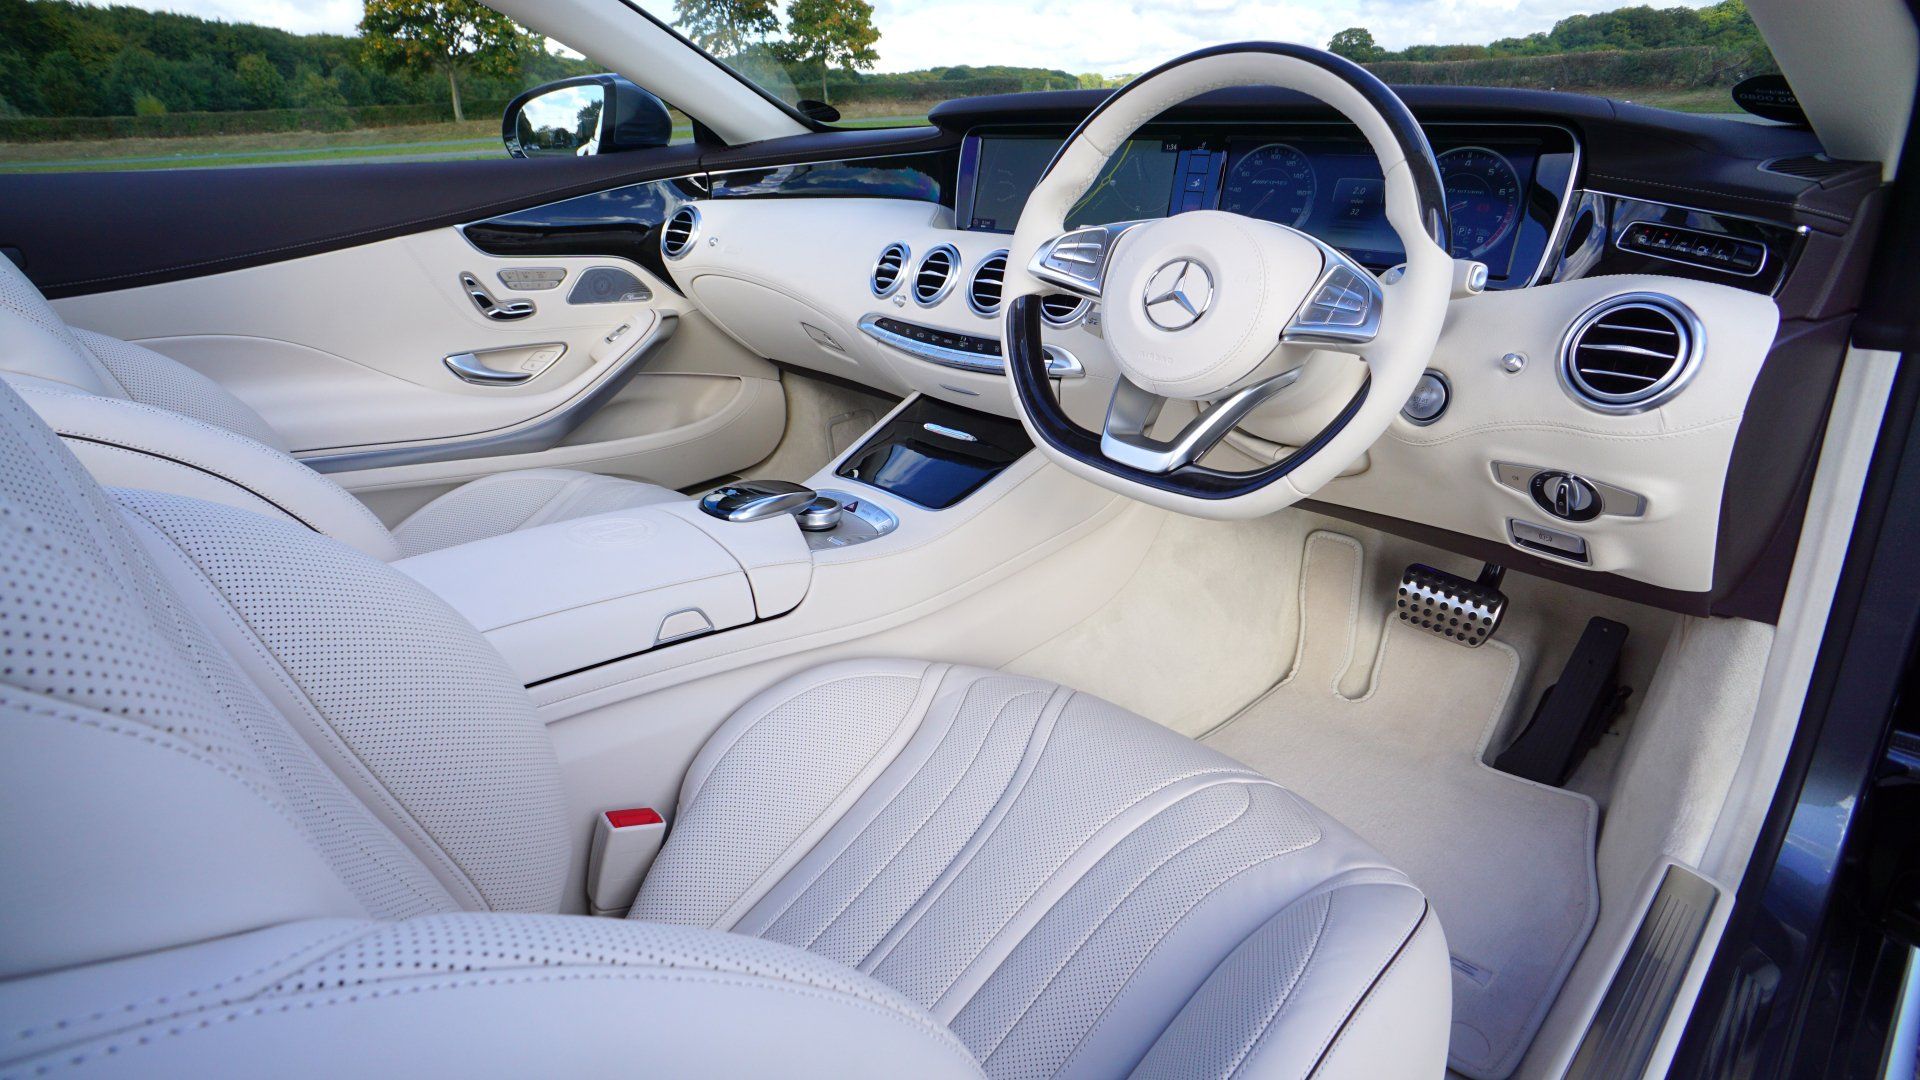 The interior of a mercedes benz car with white leather seats and a steering wheel.